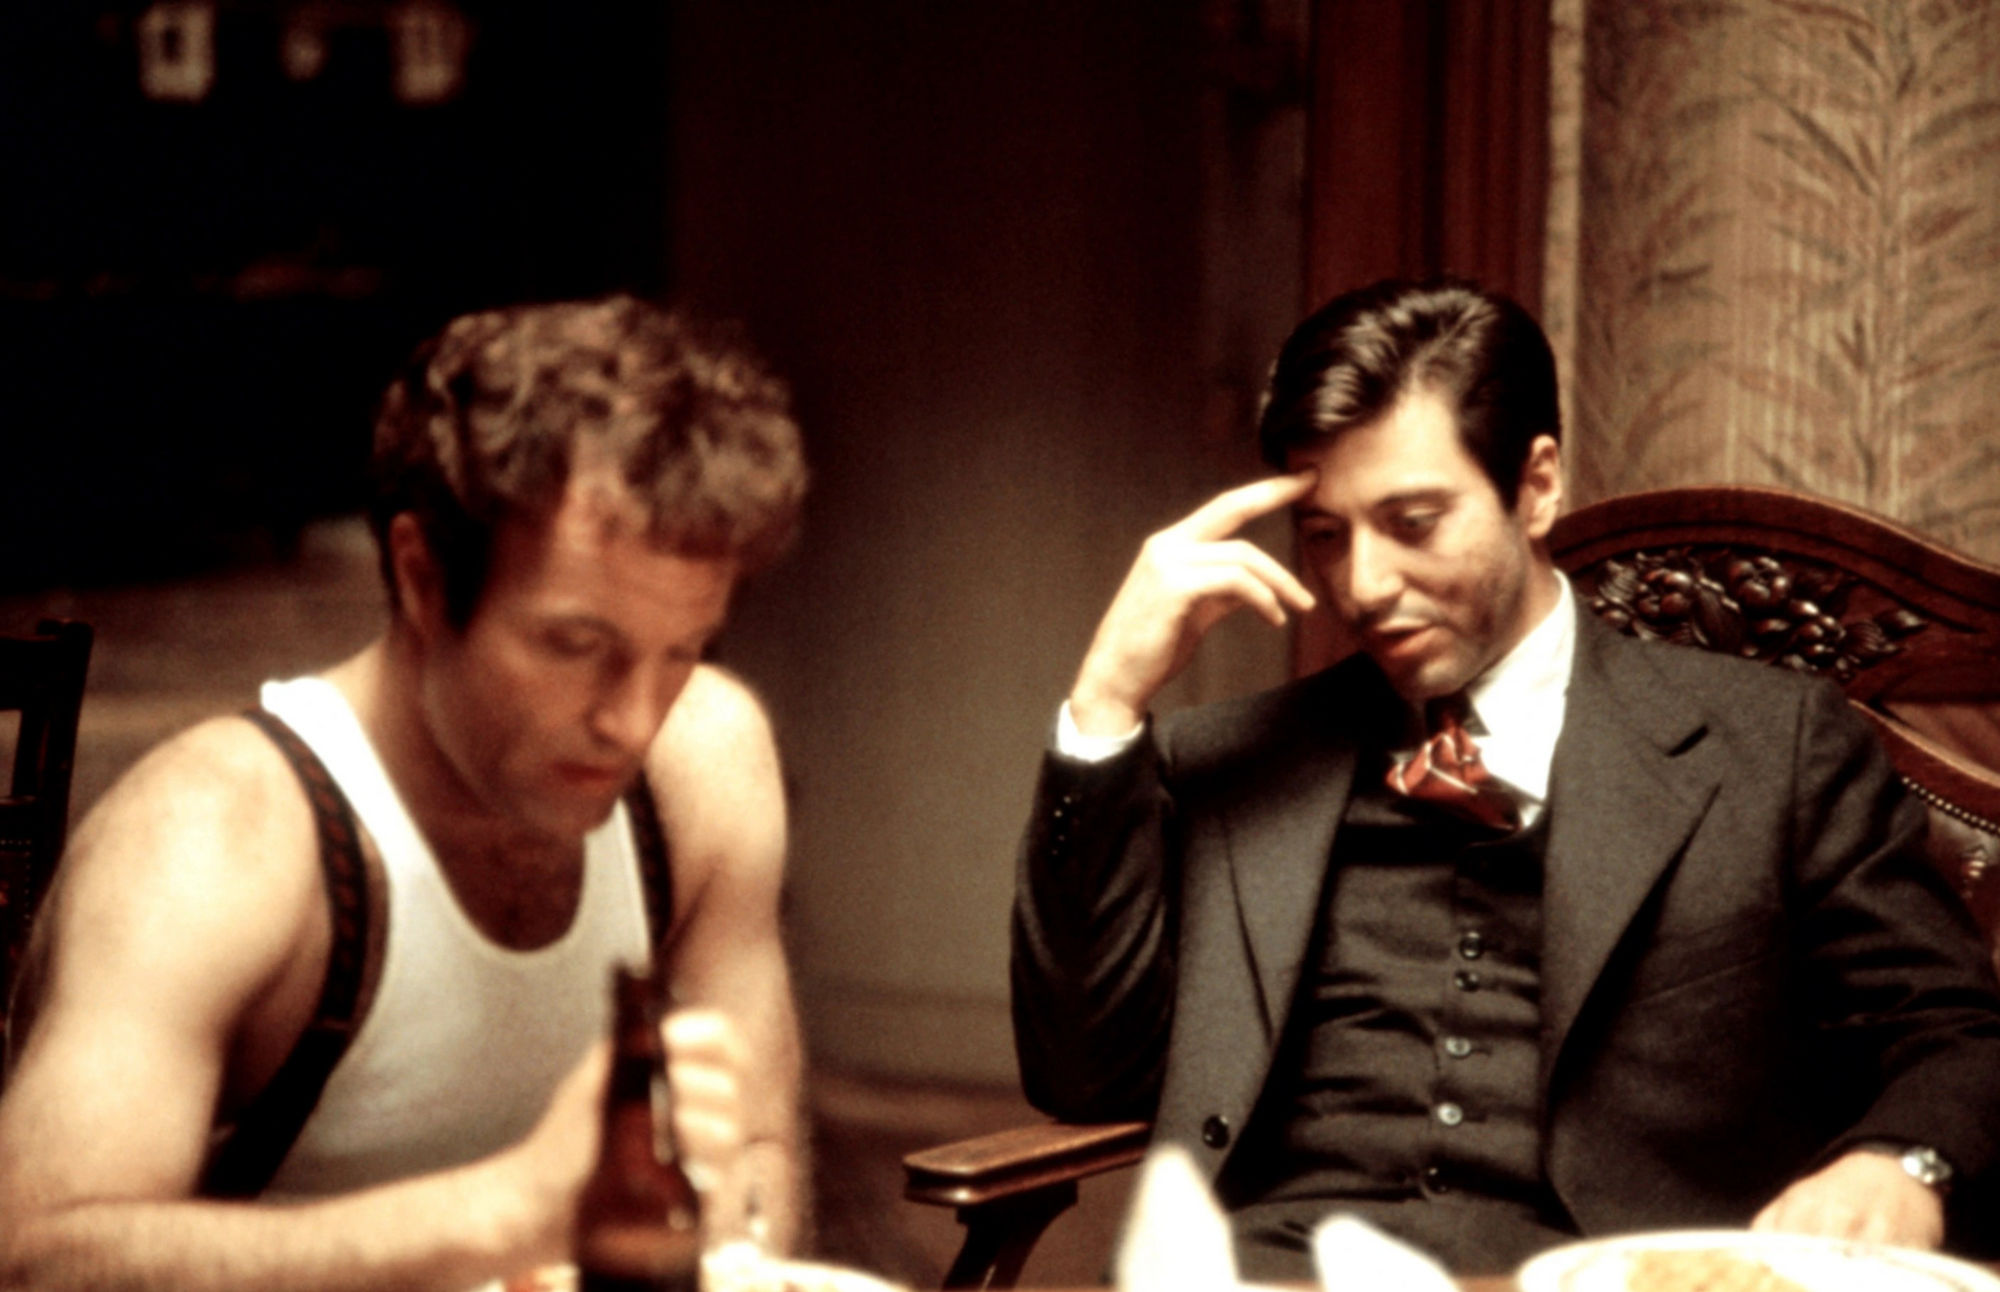 An image of Michael Corleone talking to Sonny Corleone